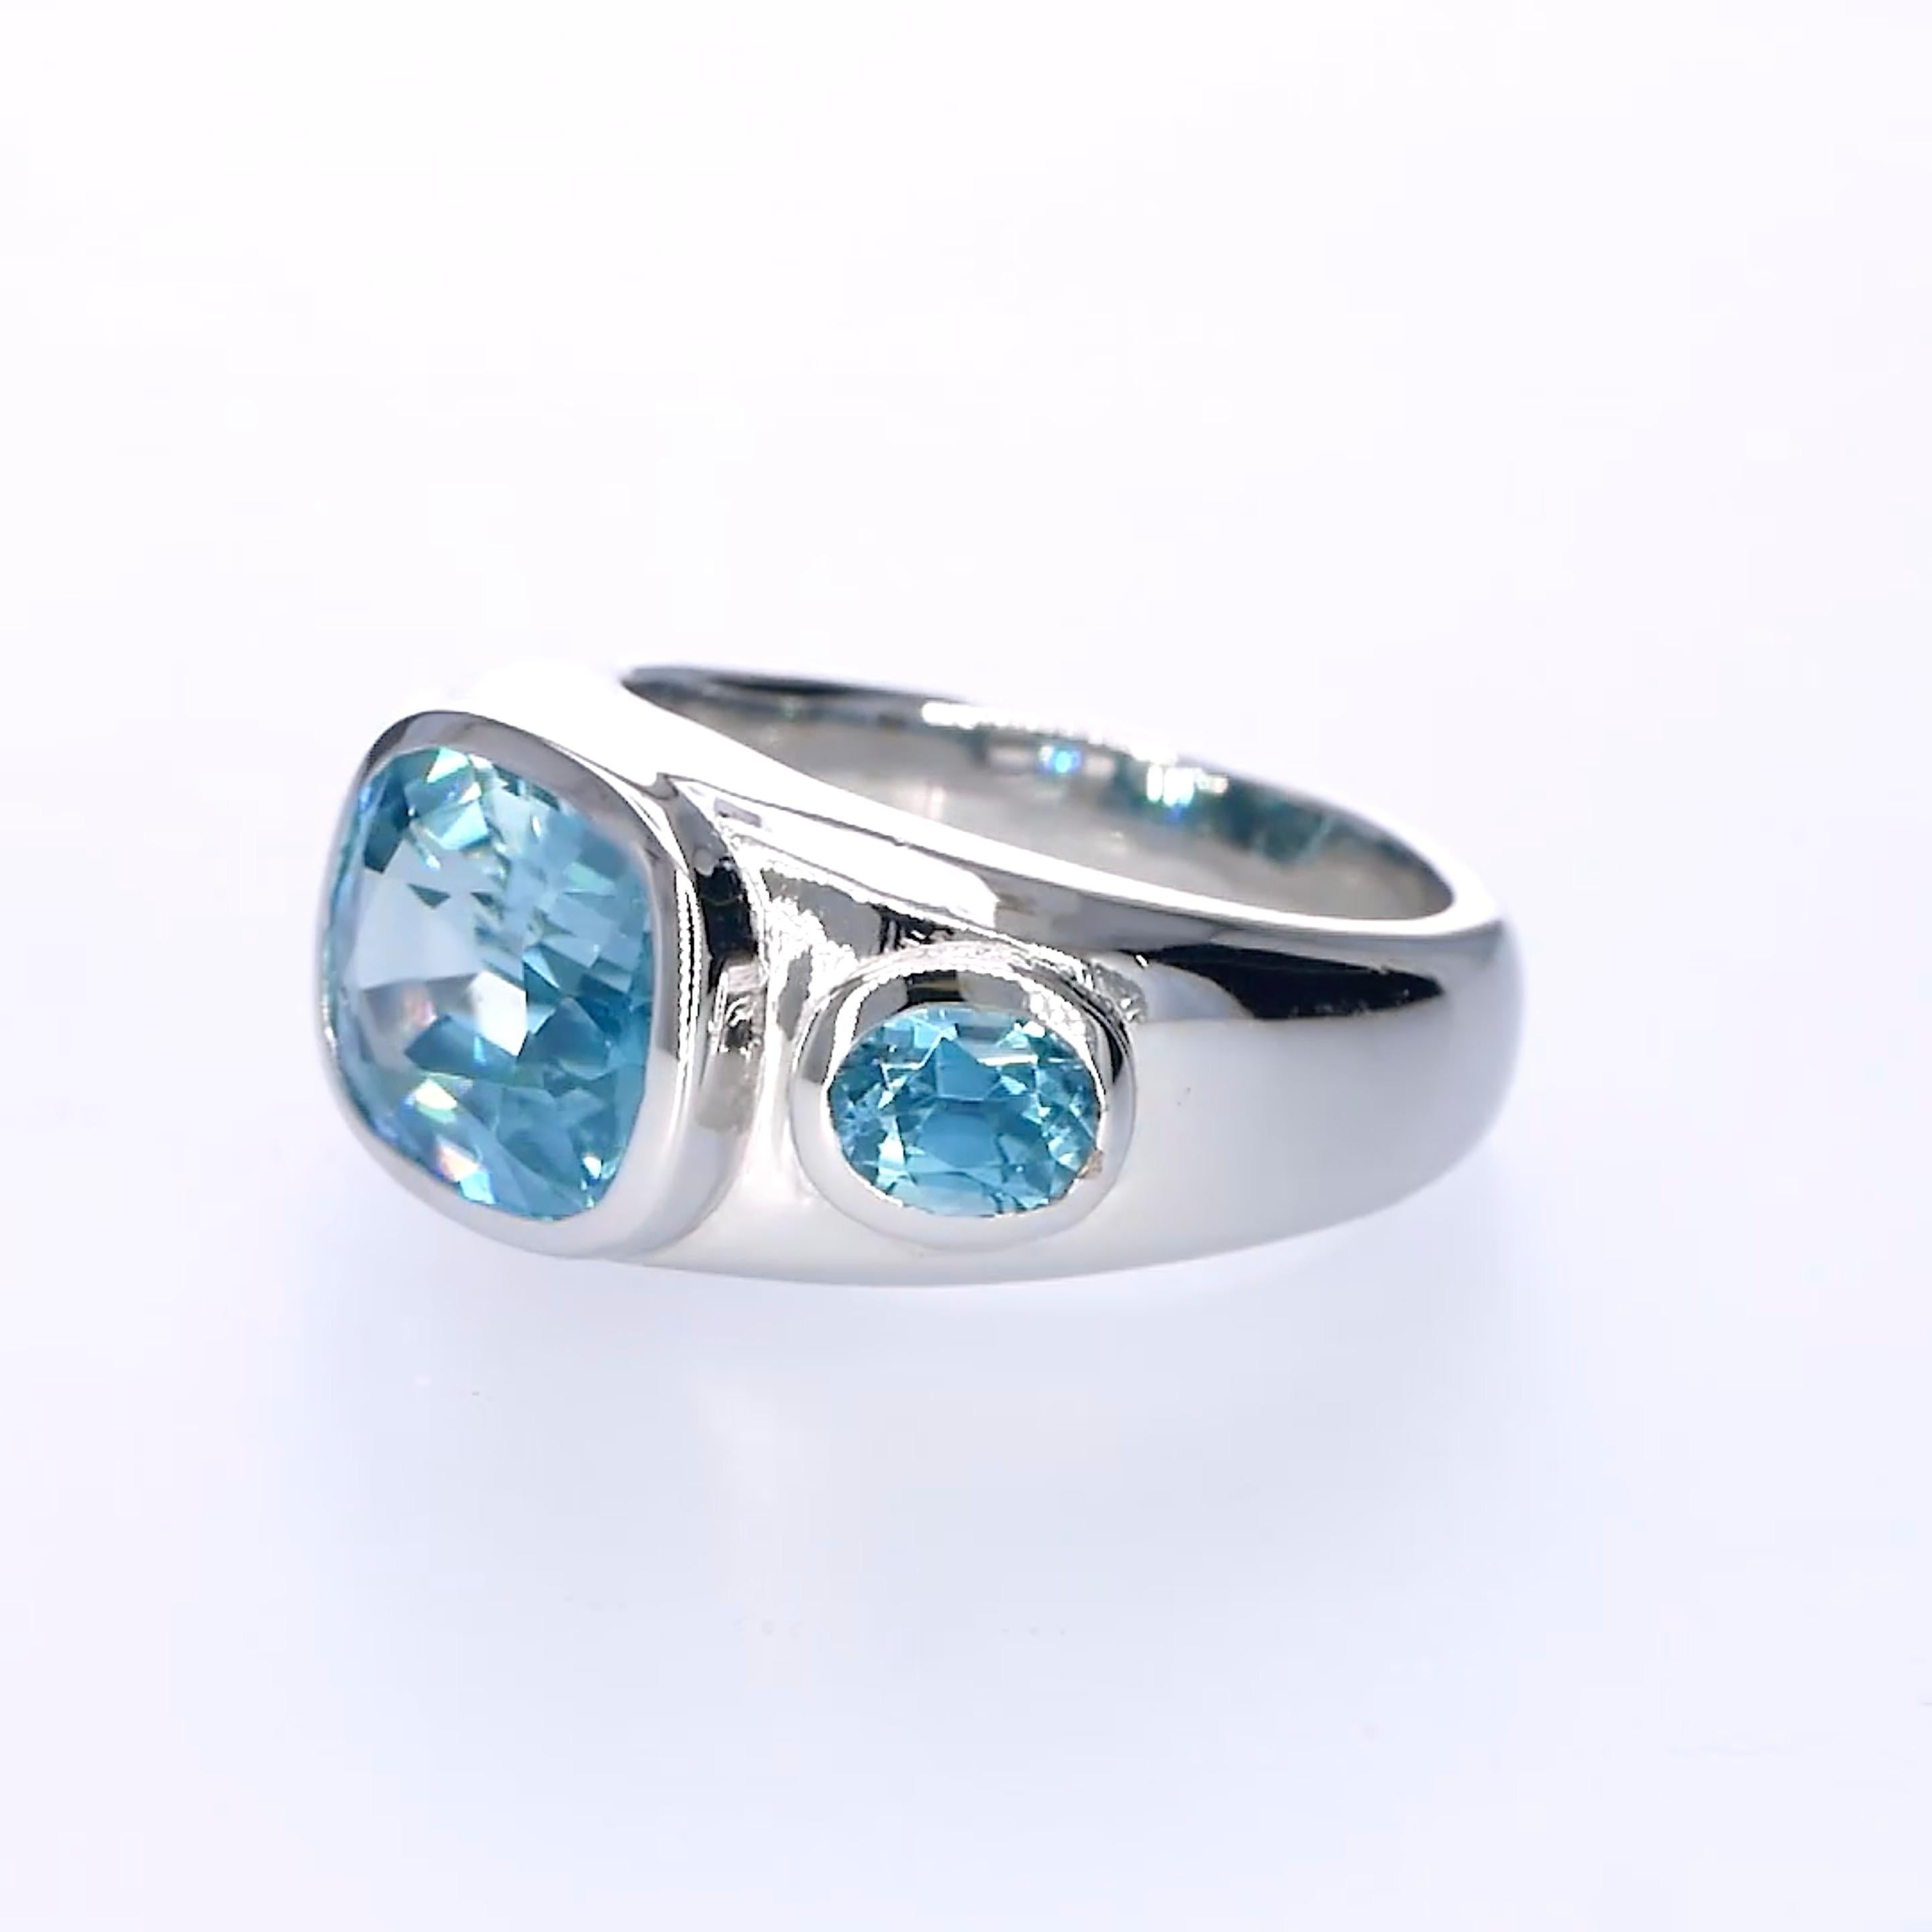 Orloff of Denmark, 7.42 ct Natural Zircon Cocktail Ring in 925 Sterling Silver In New Condition For Sale In Hua Hin, TH